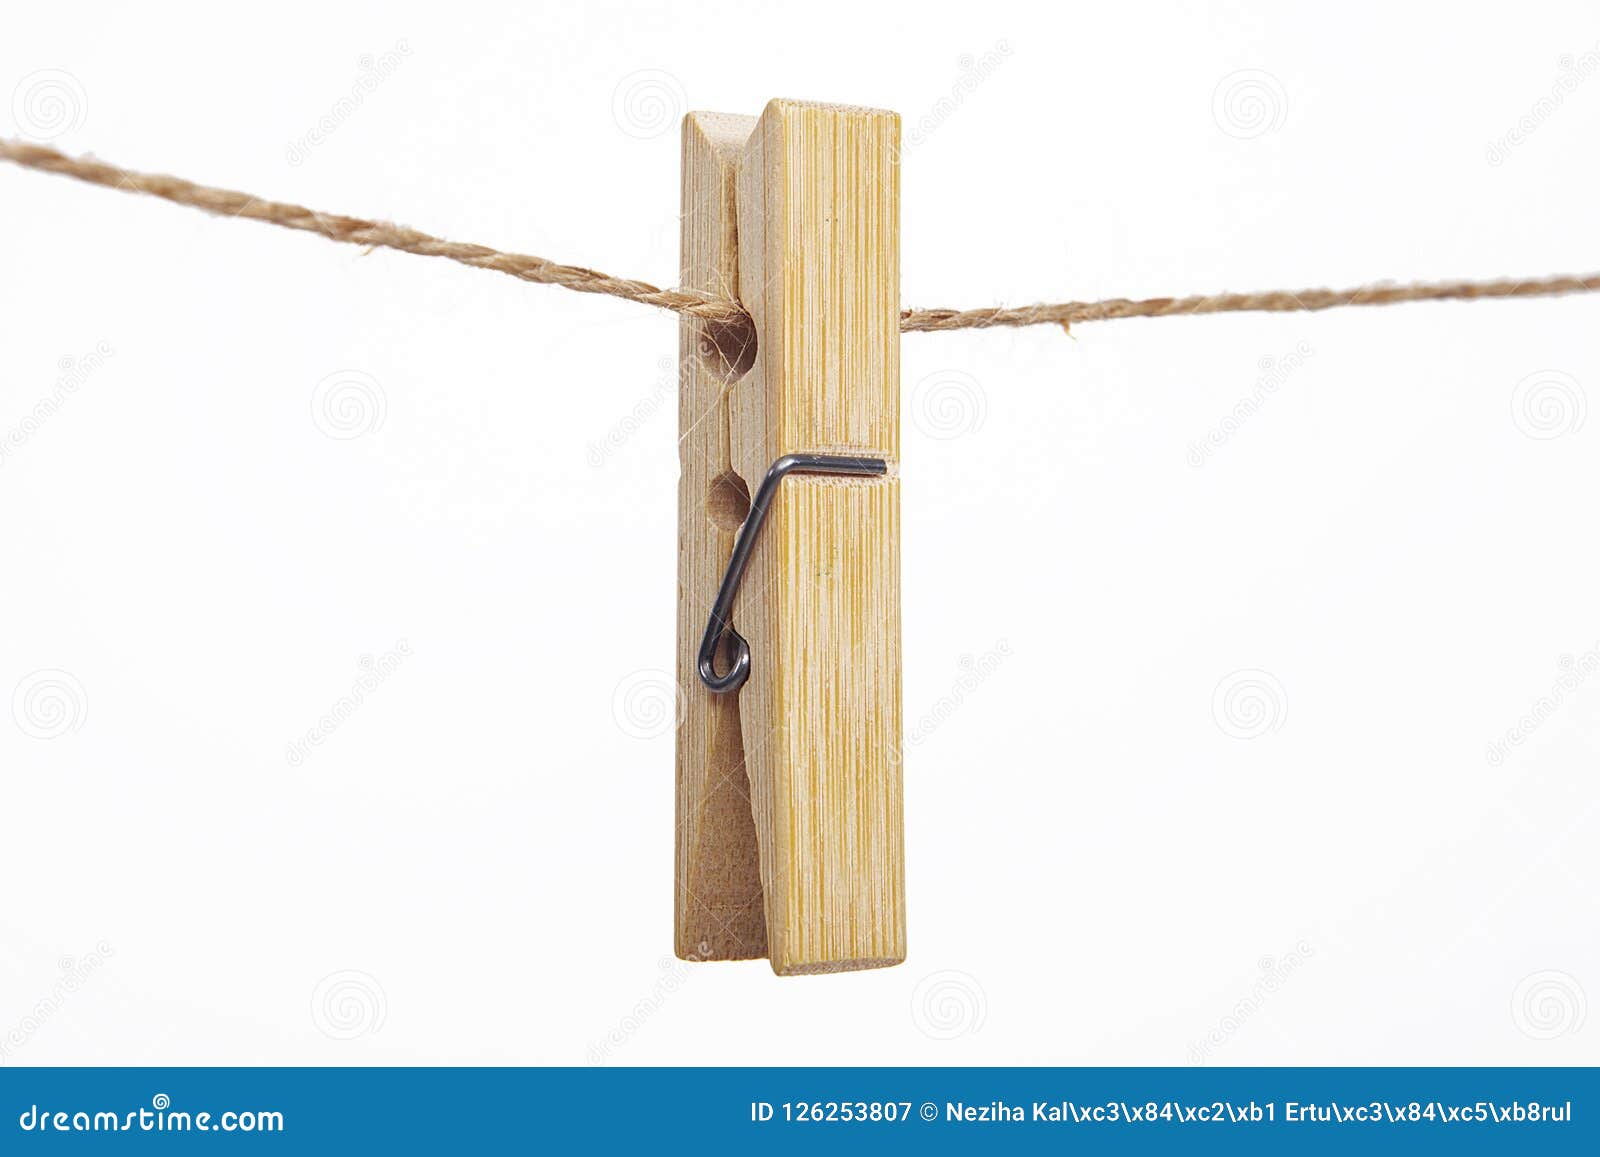 Wooden Clothes Pegs on a White Background. Stock Image - Image of ...